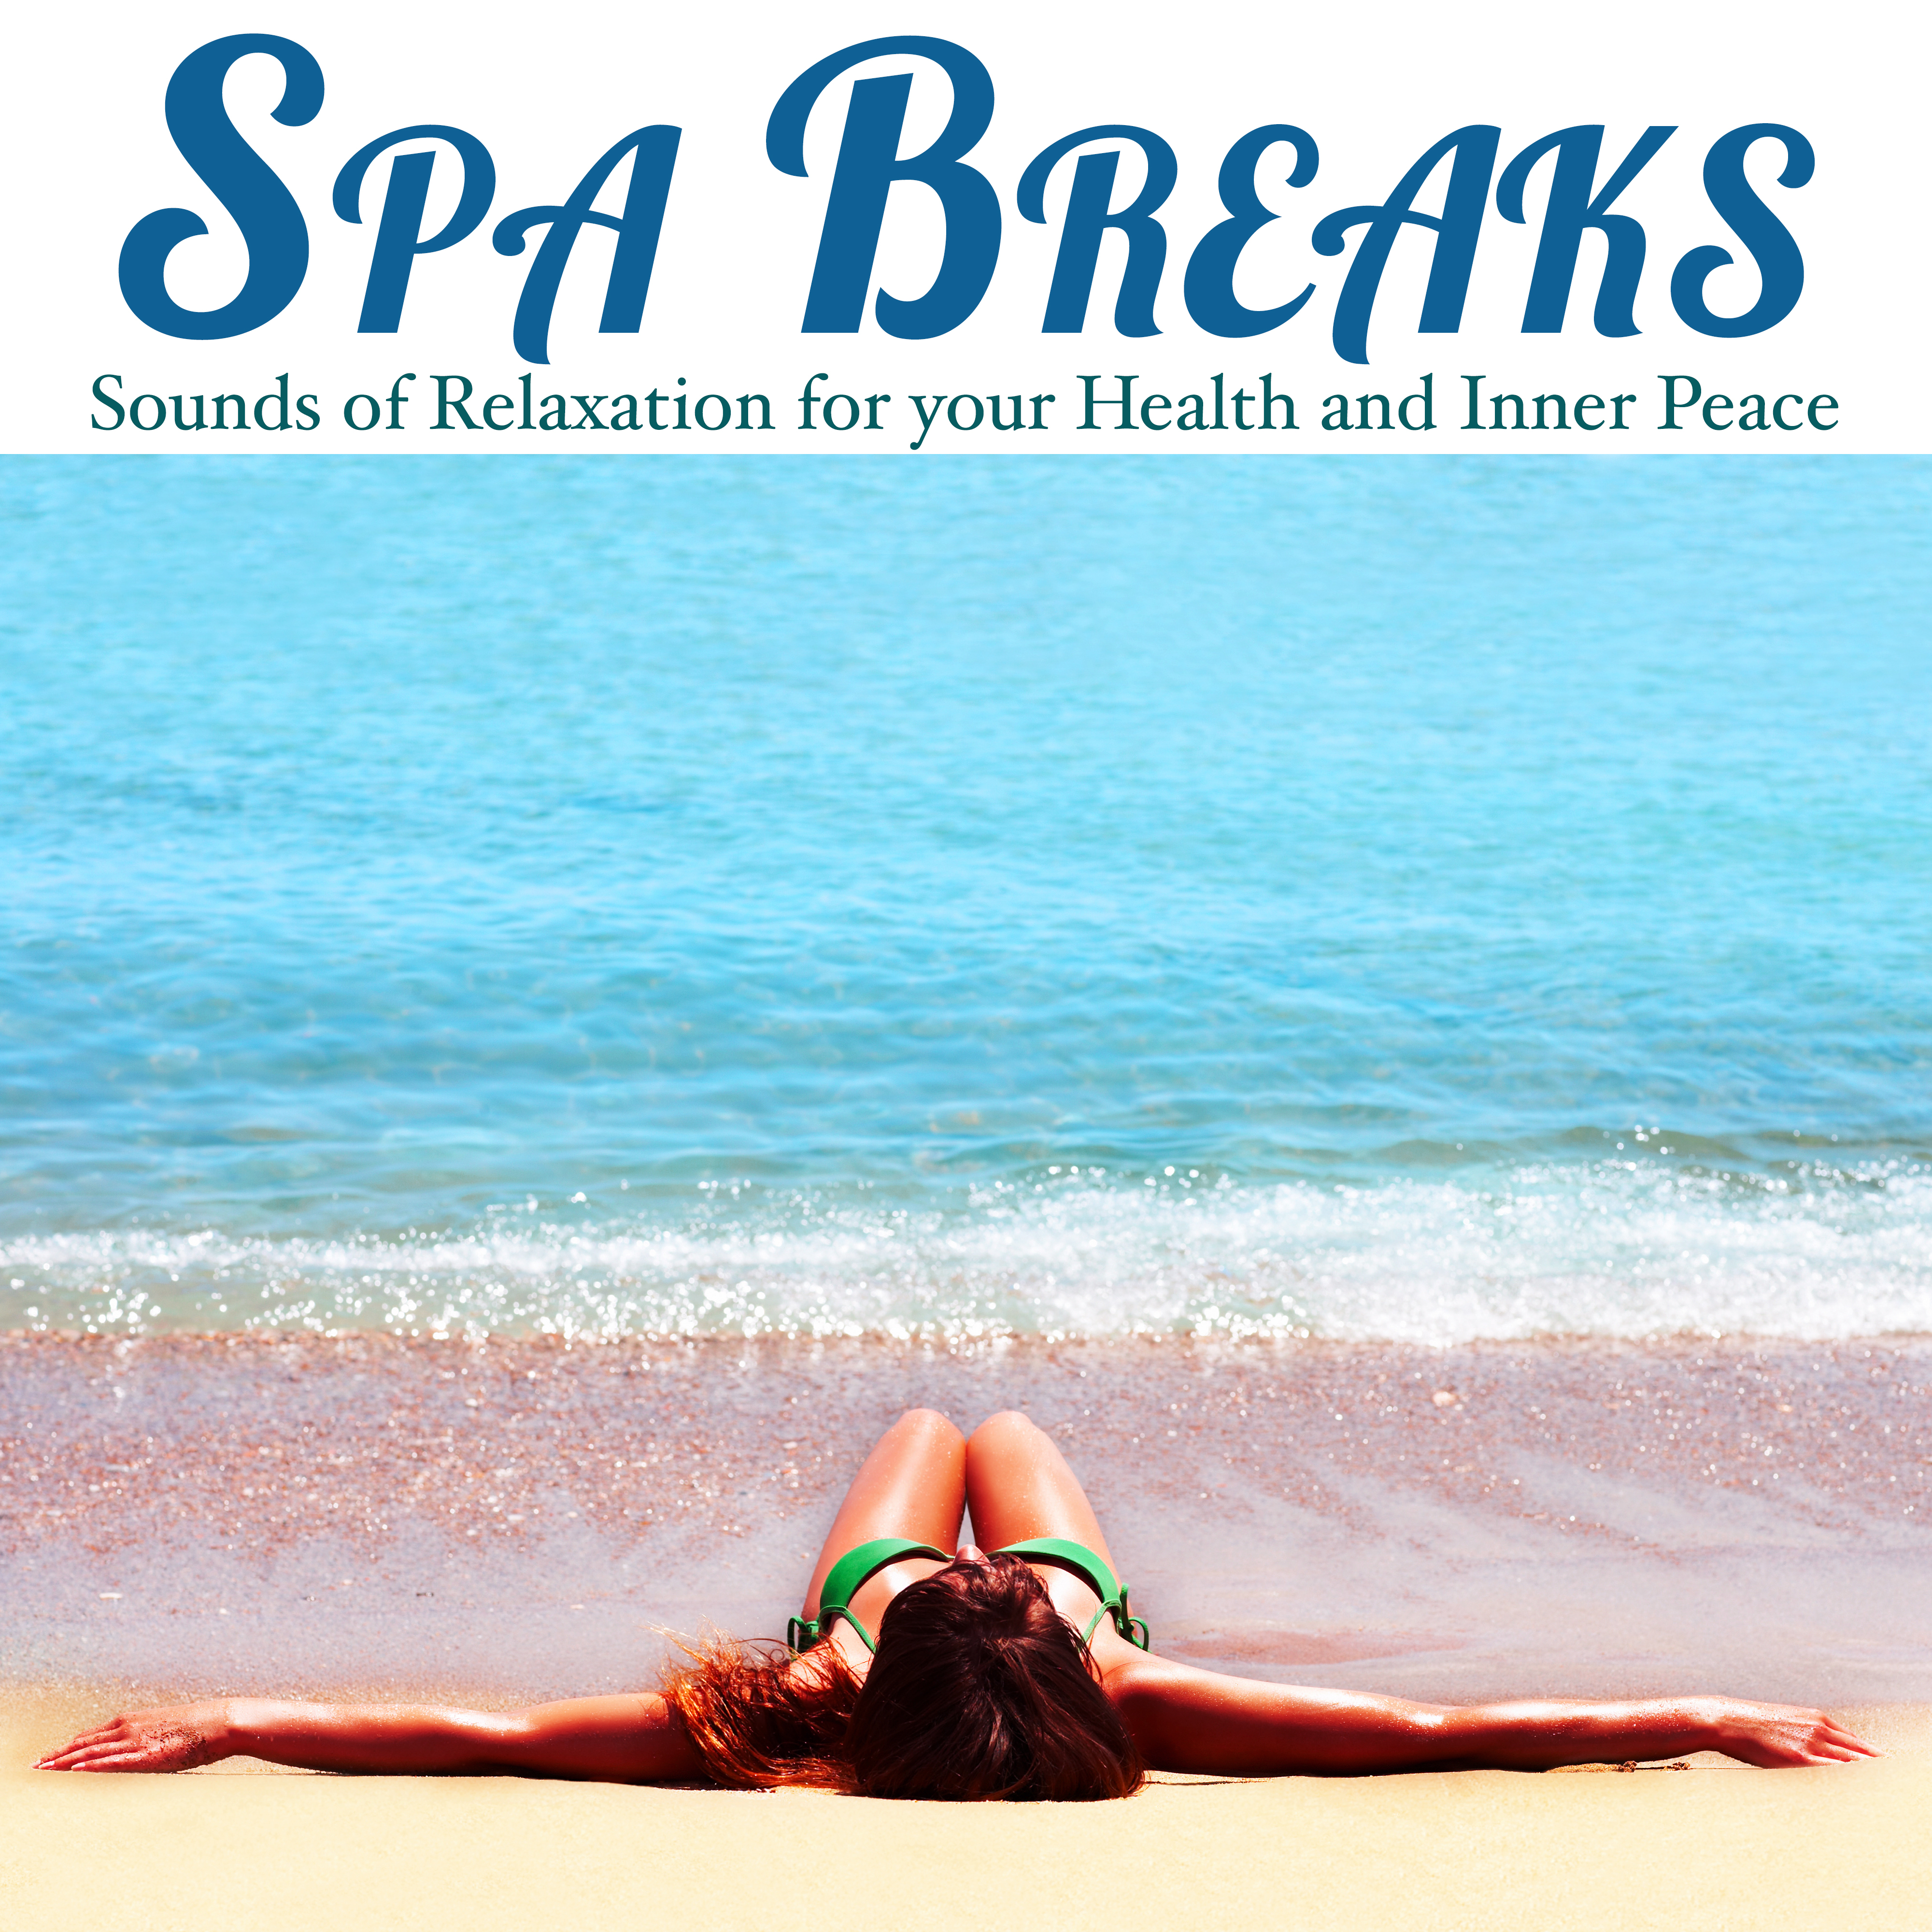 Spa Breaks - Sounds of Relaxation for your Health and Inner Peace